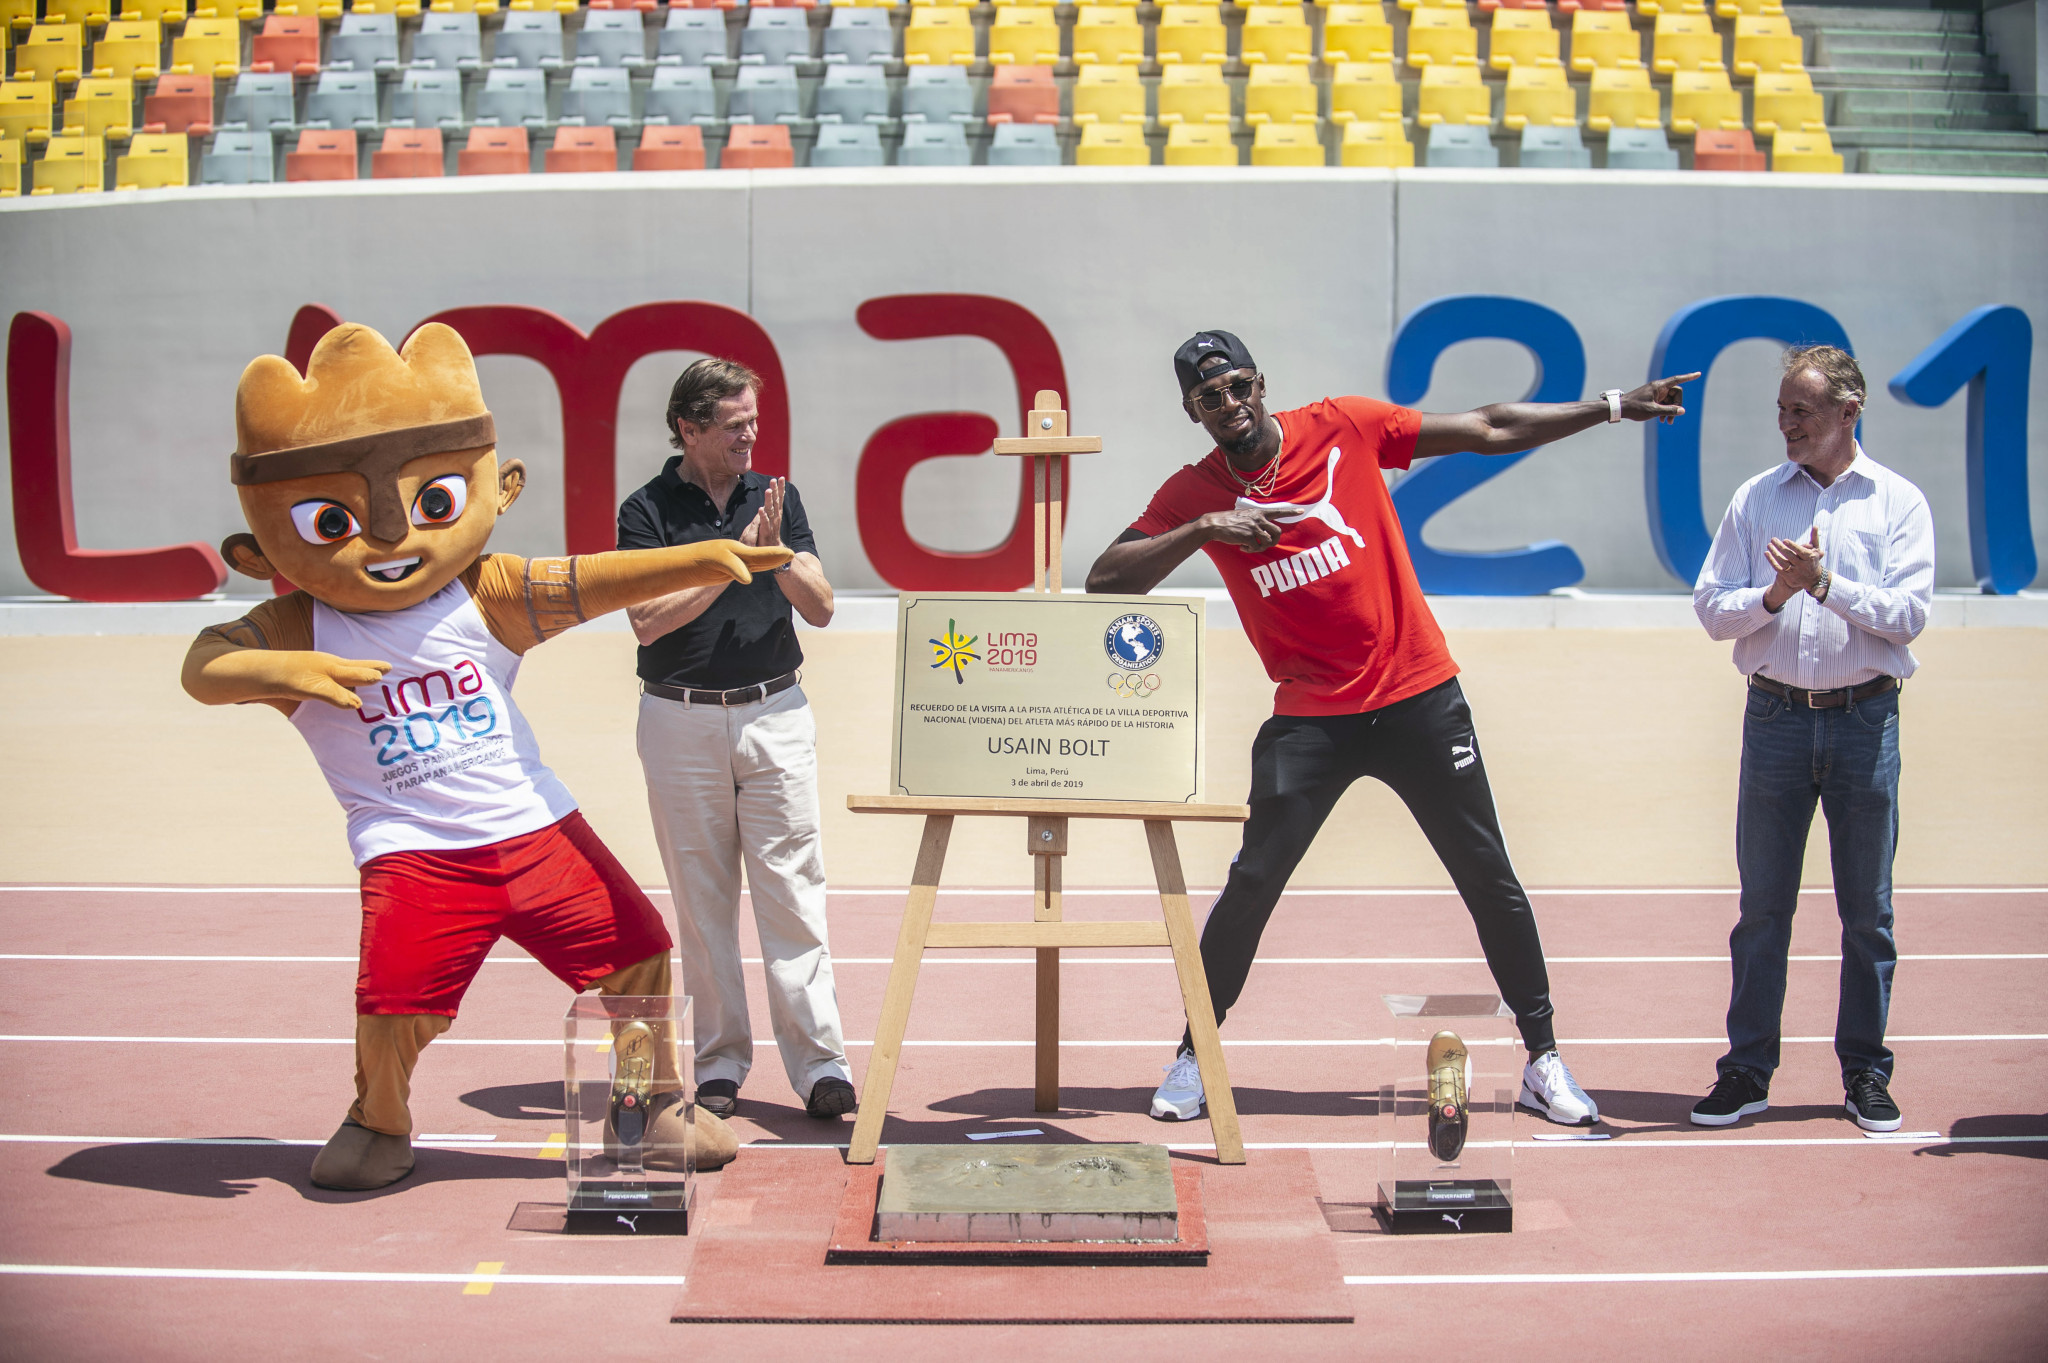 Lima 2019 will be the biggest sporting event in Peru's history and begins this month ©Getty Images